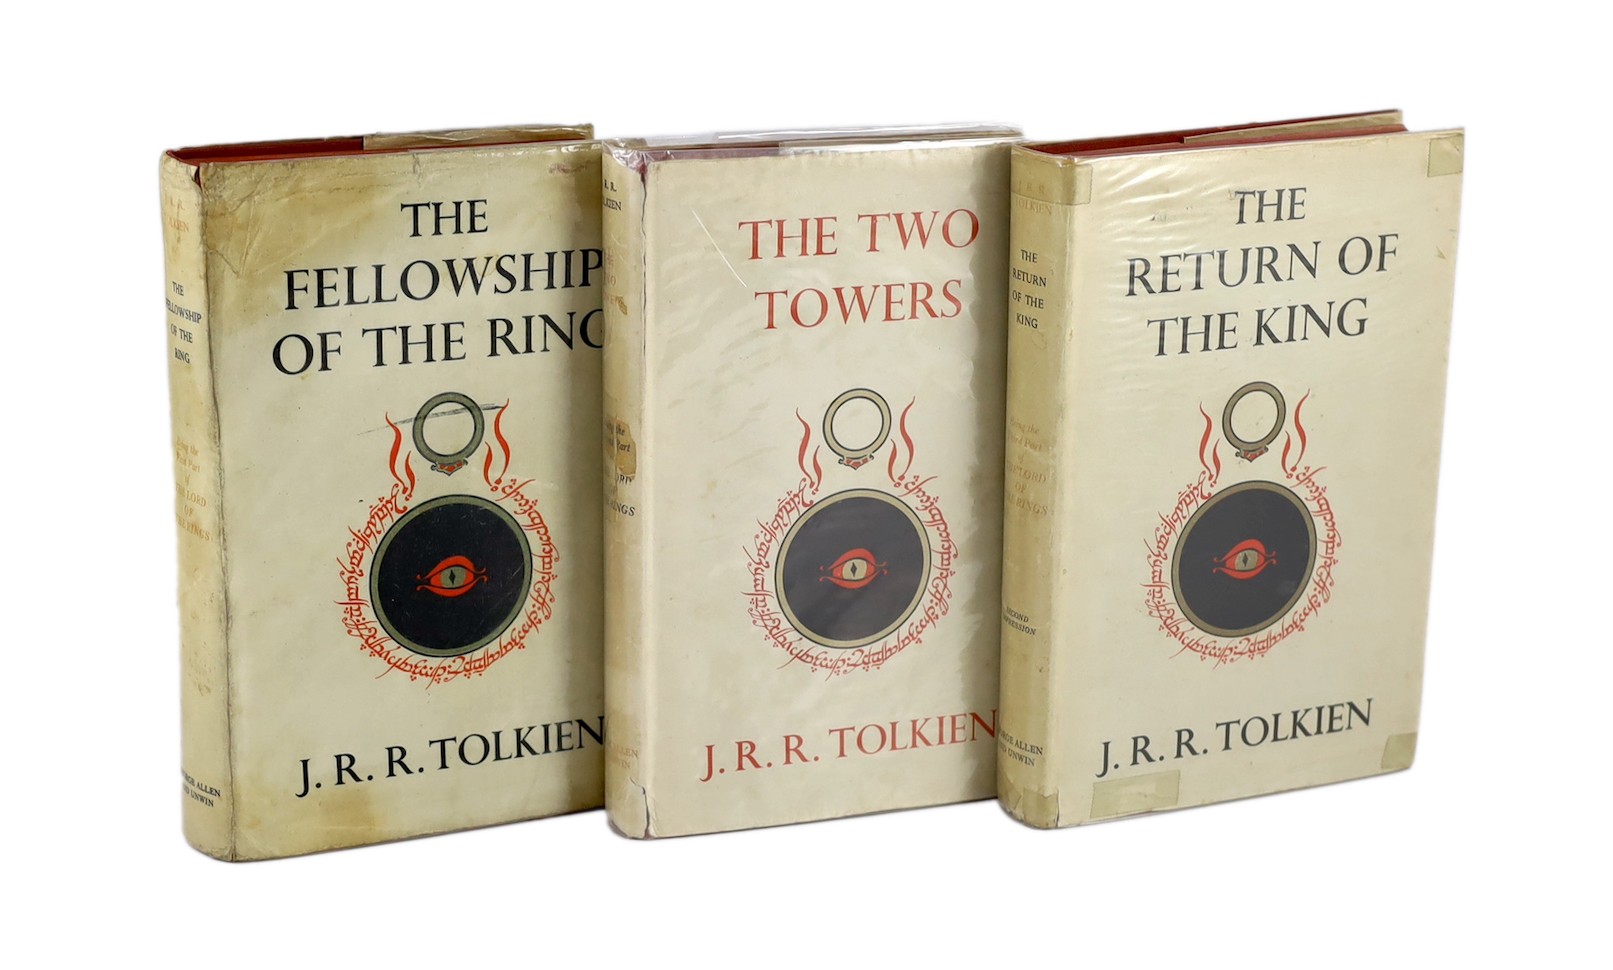 Tolkien, J.R.R - The Lord of the Rings, 3 vols, 1st editions                                                                                                                                                                